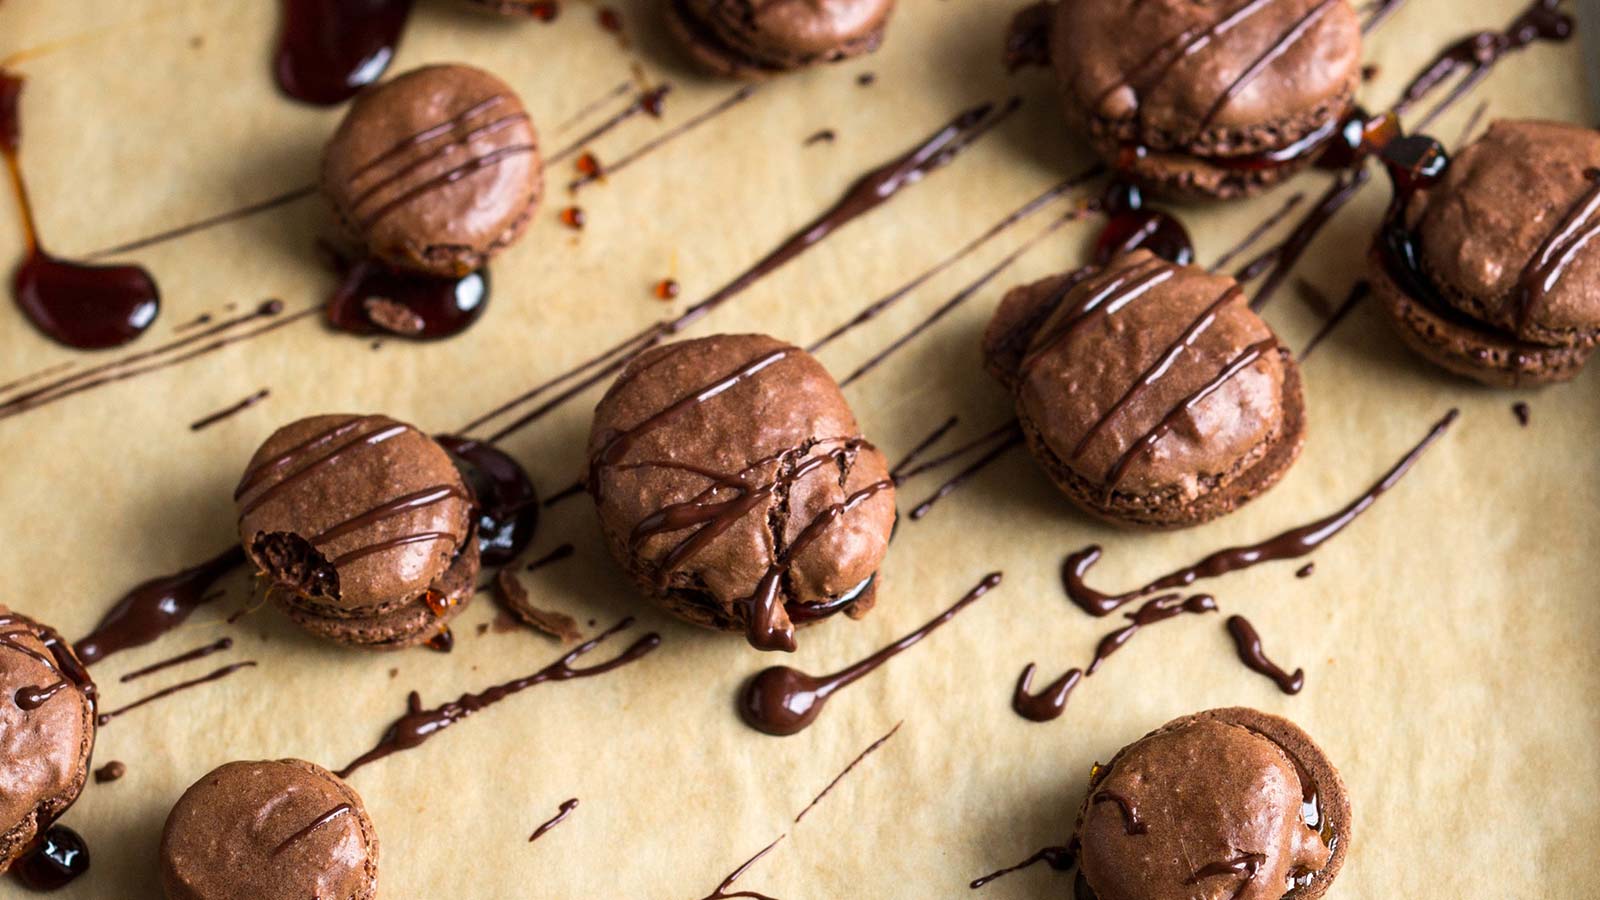 🍪 Only a True Chocoholic Will Have Eaten at Least 13/25 of These Treats Chocolate macarons